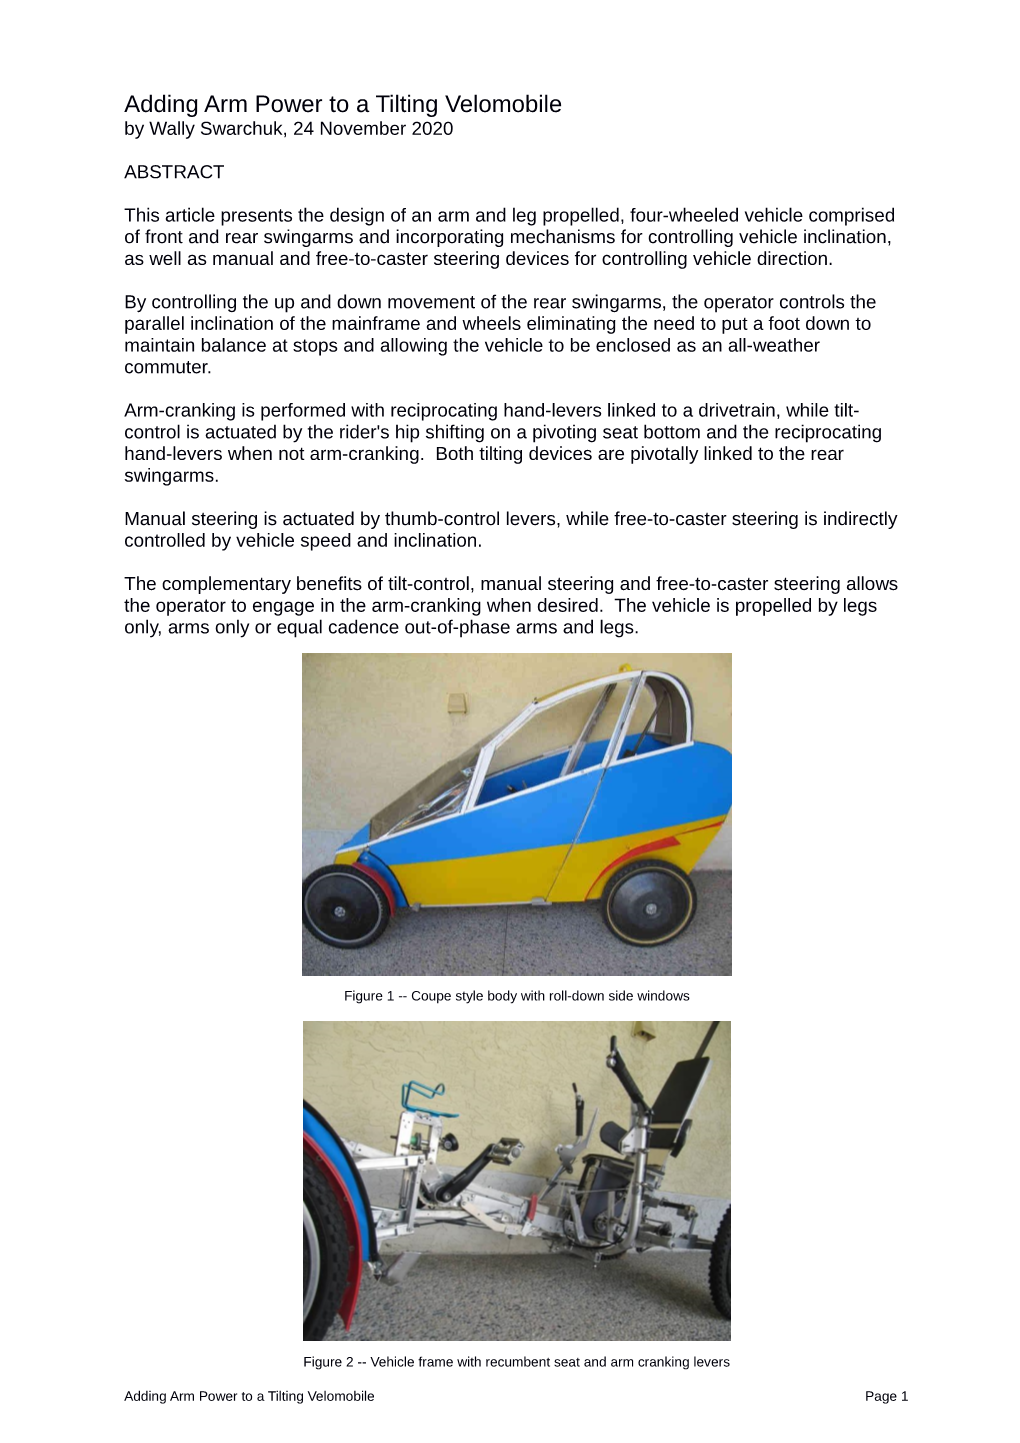 Adding Arm Power to a Tilting Velomobile by Wally Swarchuk, 24 November 2020